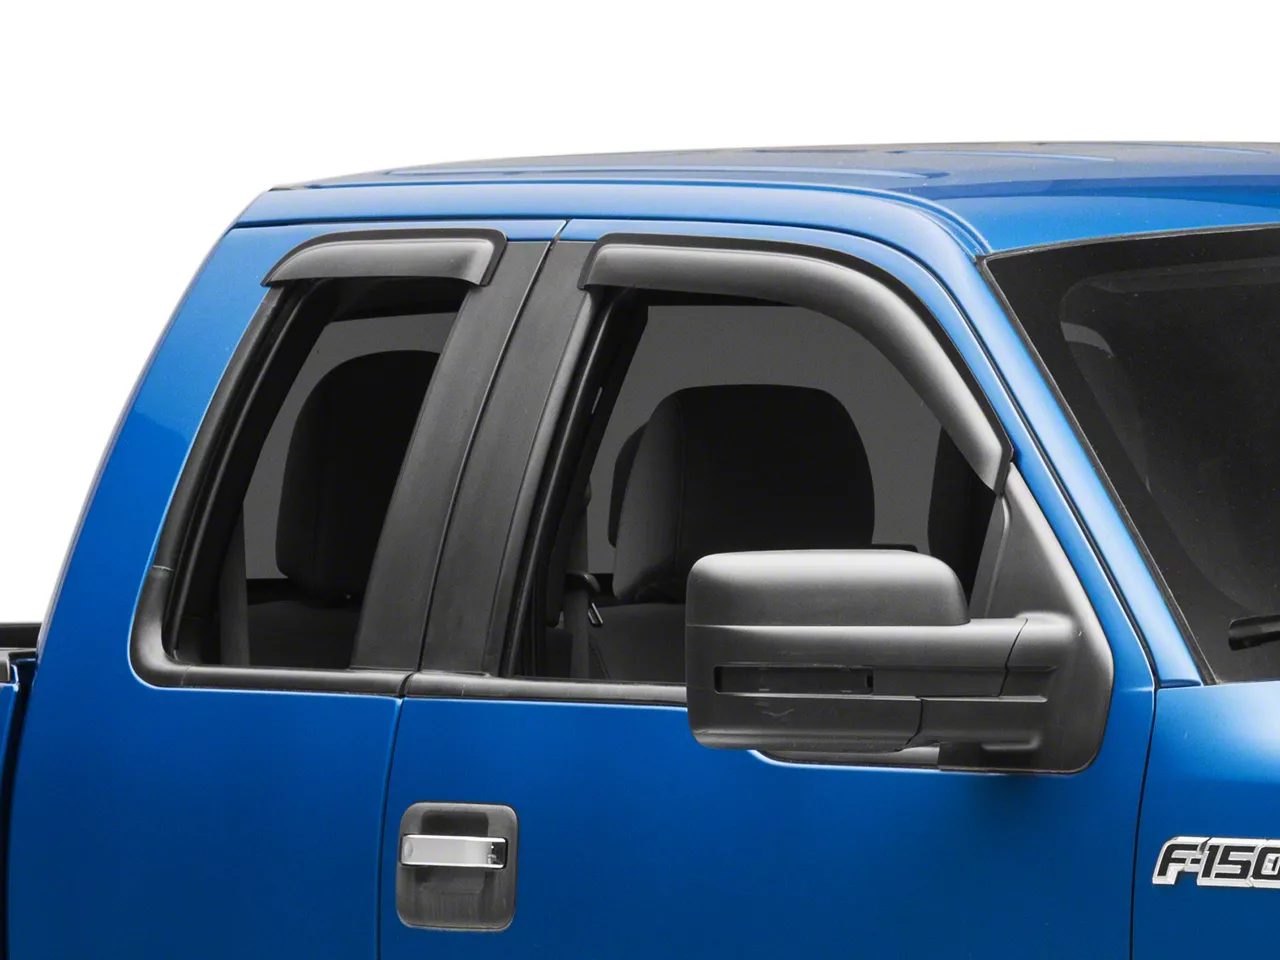 F-150 in-Channel Window Deflectors (04-14 F-150 SuperCab) - Free Shipping